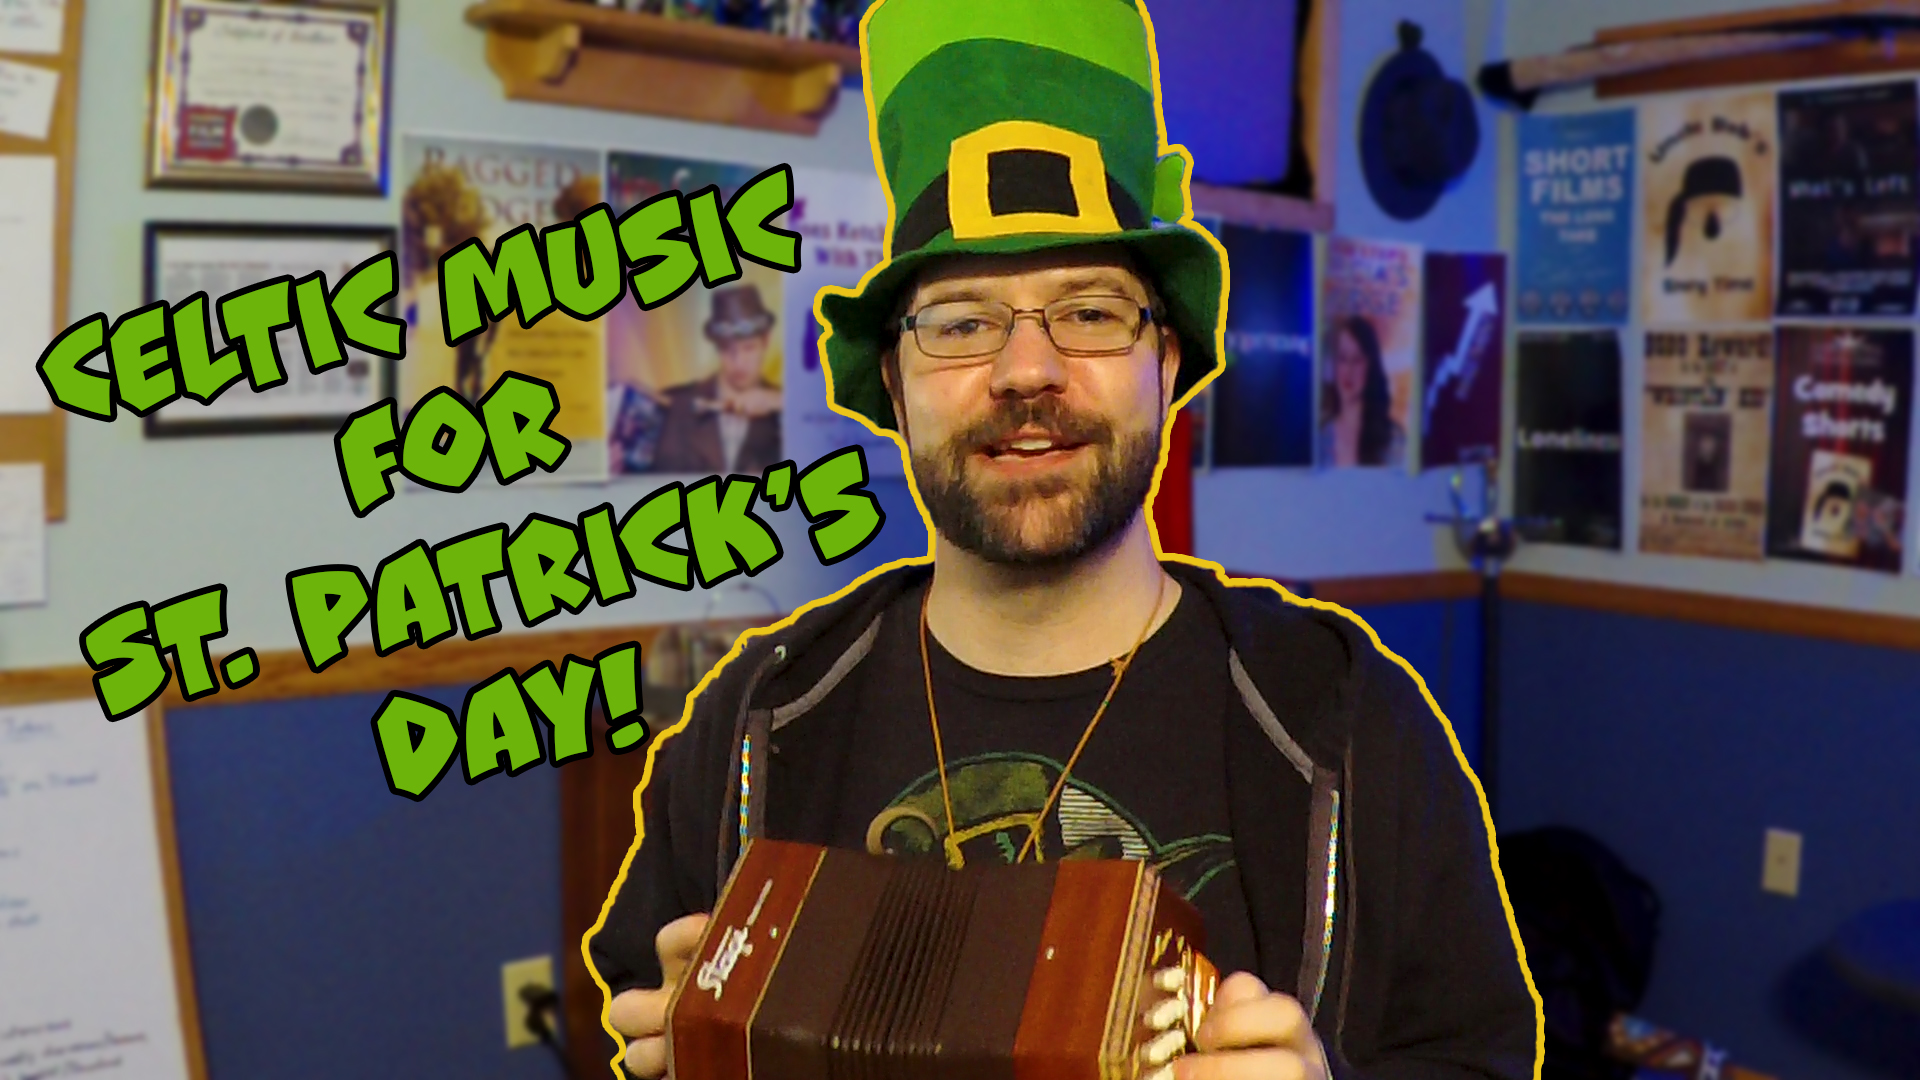 Playing Celtic Music for St. Patrick's Day - Zack Lawrence Vlog